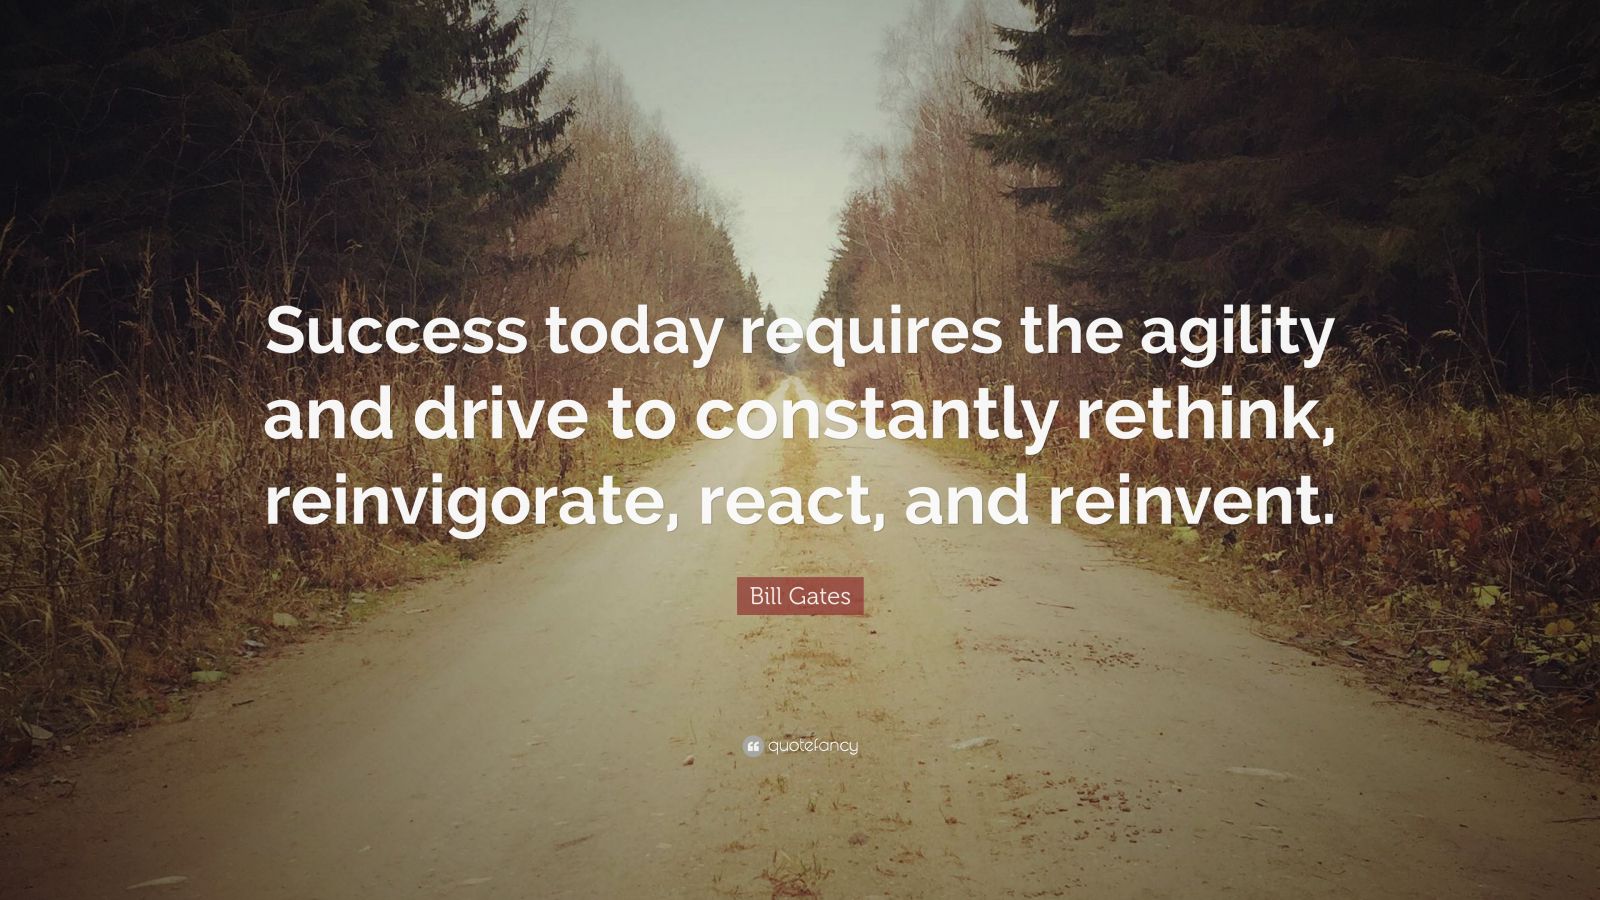 Bill Gates Quote: “Success today requires the agility and drive to ...